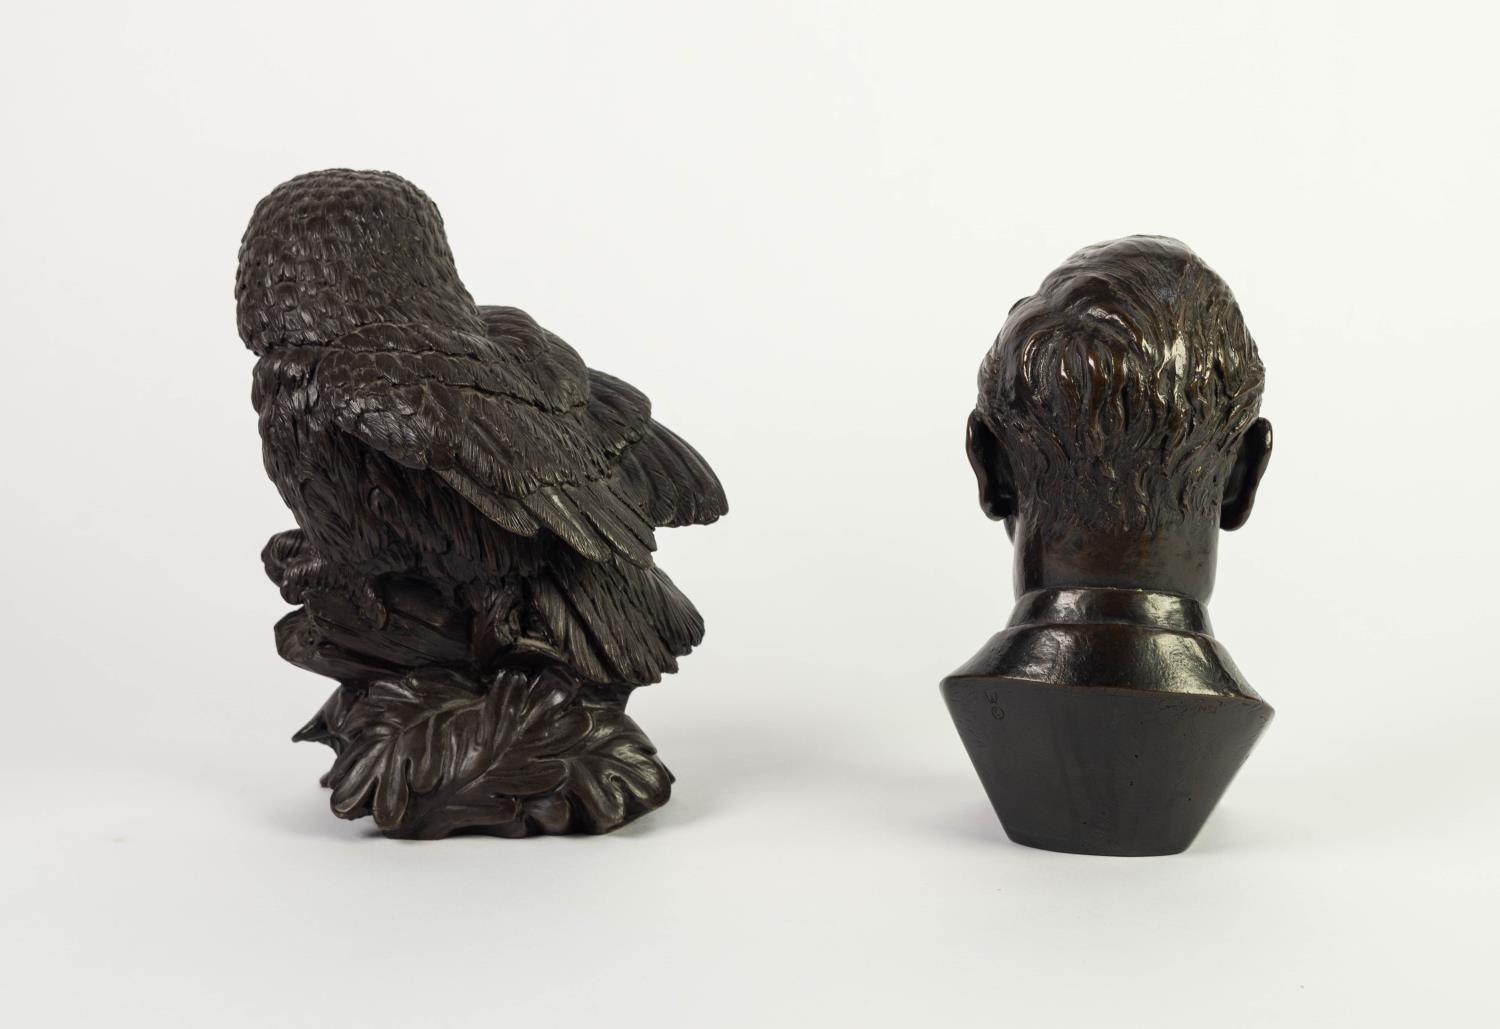 TOM MACKIE FOR HEREDITIES BRONZED RESIN SCULPTURE Modelled as an owl perched on an oak tree branch - Image 2 of 2